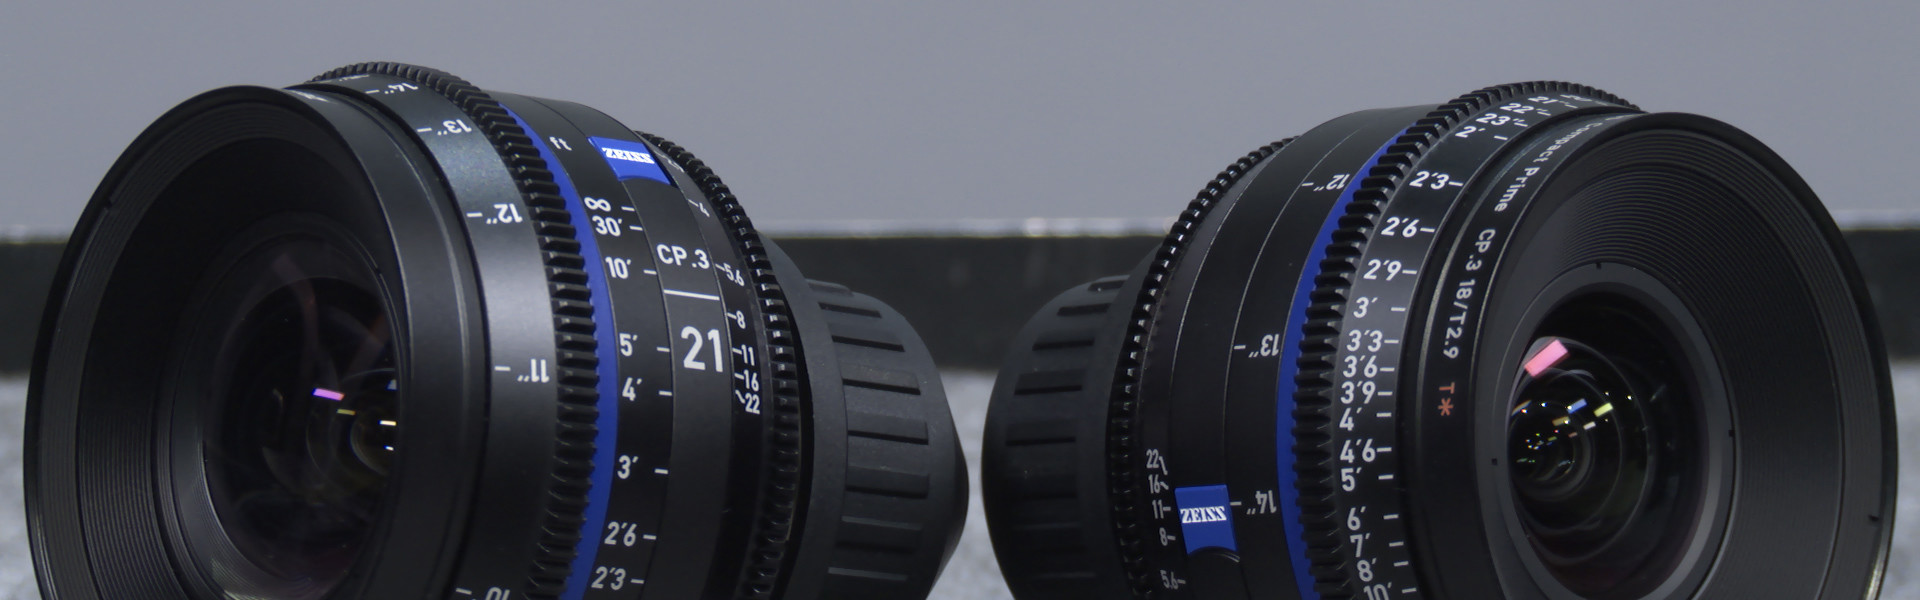 Header image for article At the Bench: ZEISS Compact Prime 3 and the Compact Prime 3 XD